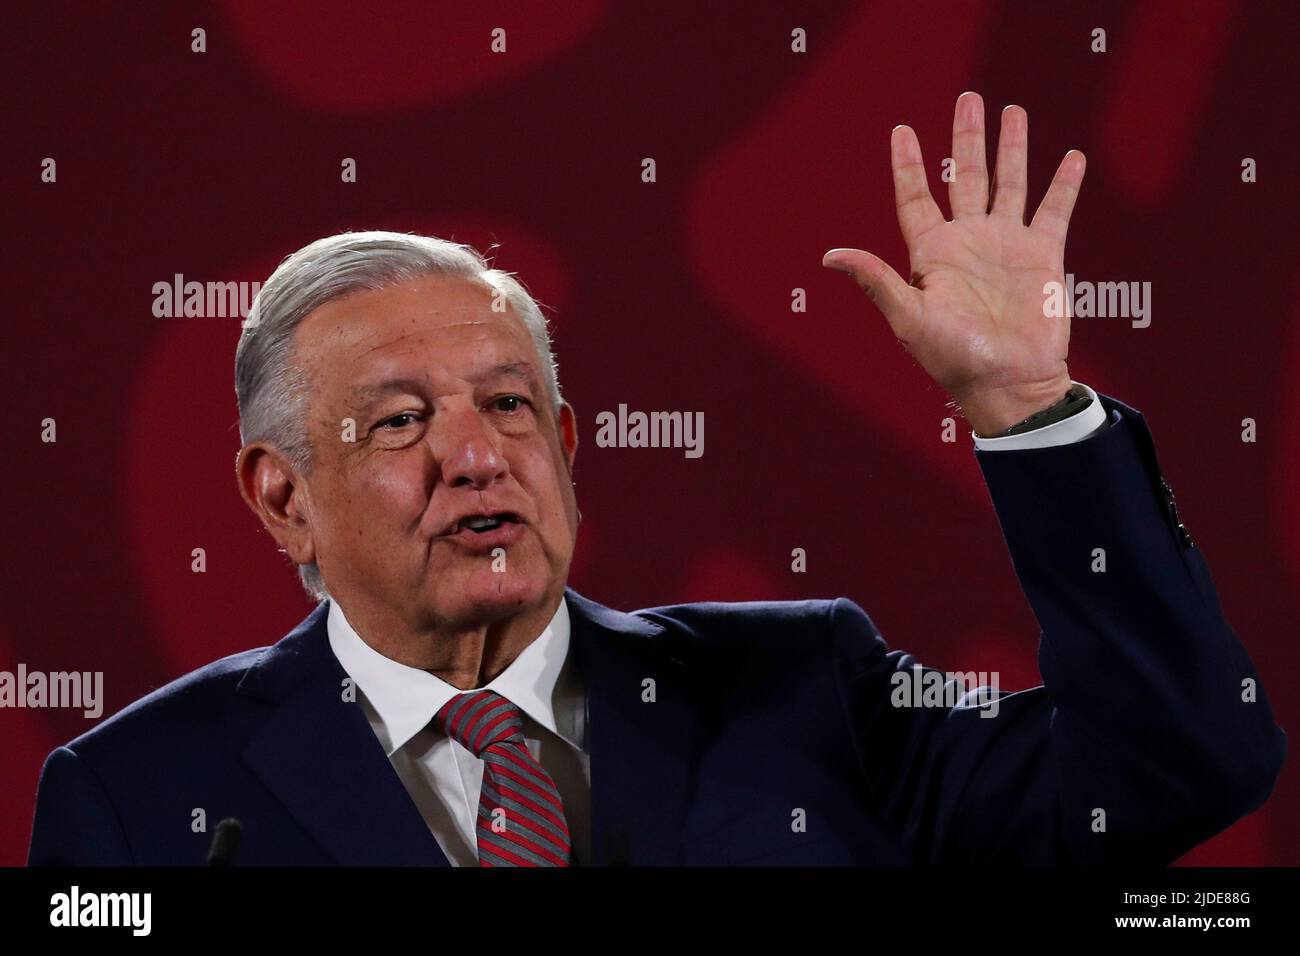 Mexico's President Andres Manuel Lopez Obrador speaks during a news conference at the National Palace in Mexico City, Mexico, June 20, 2022. REUTERS/Edgard Garrido Stock Photo